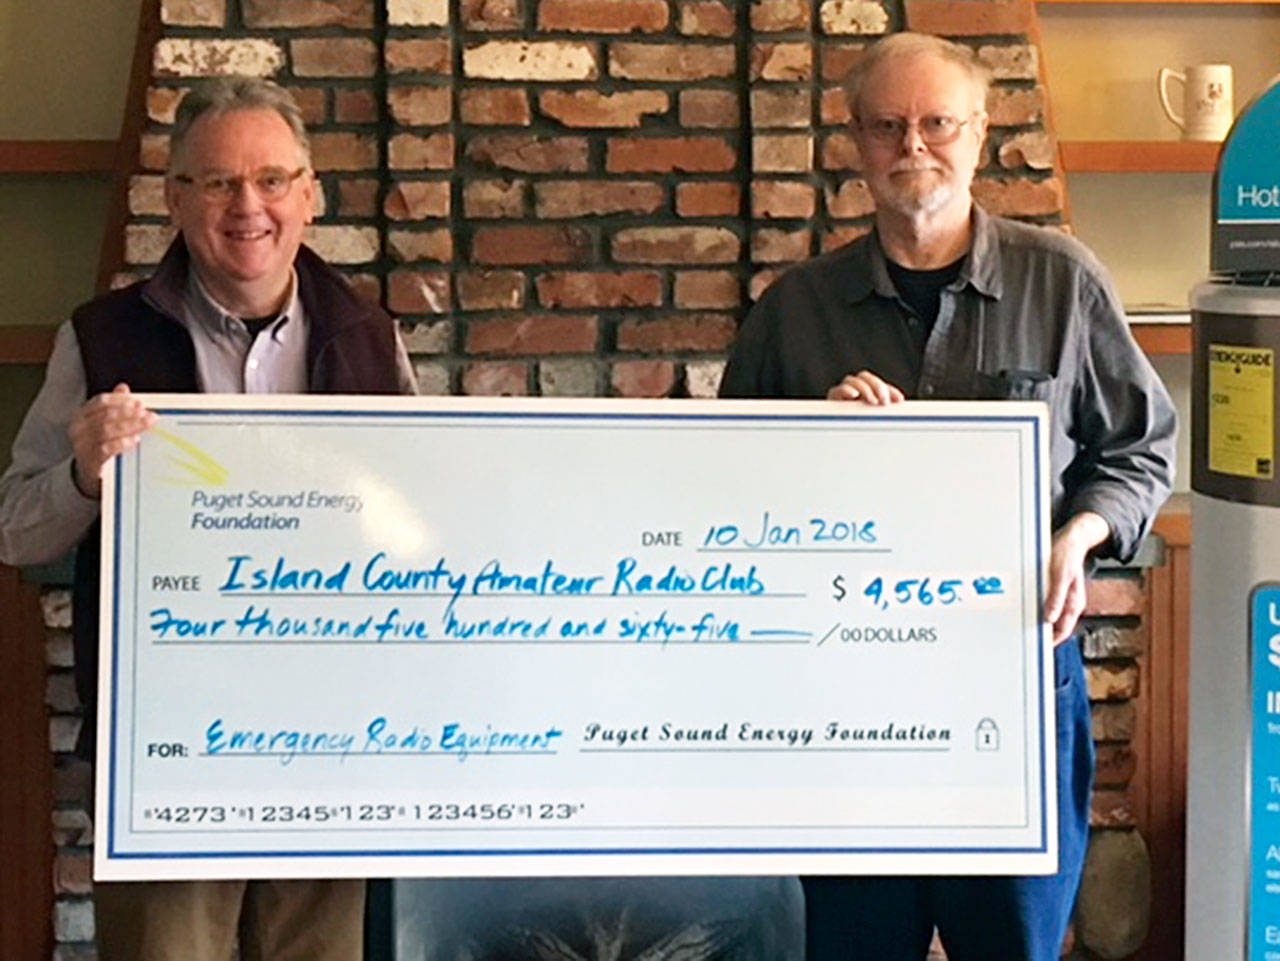 Contributed photo — Walt Blackford (left), Puget Sound Energy regional outreach manager, presented a grant of $4,565 from the Puget Sound Energy Foundation to John Acton of the Island County Amateur Radio Club (ICARC).